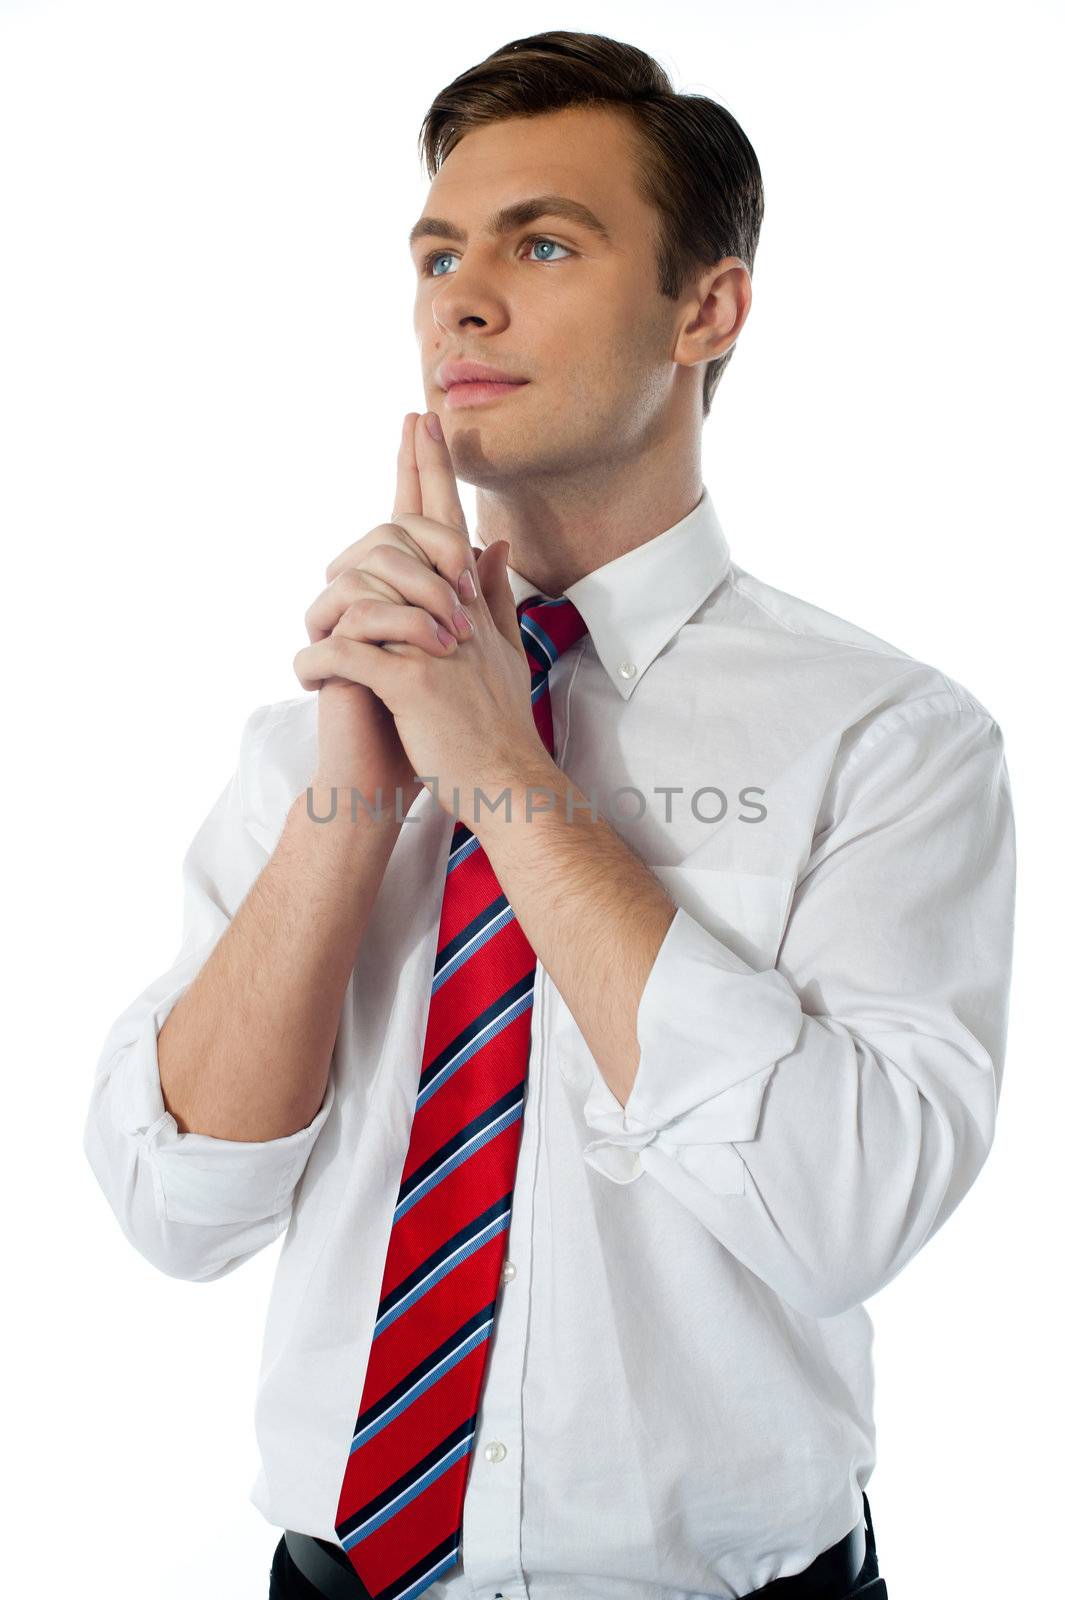 Mature male executive thinking by stockyimages